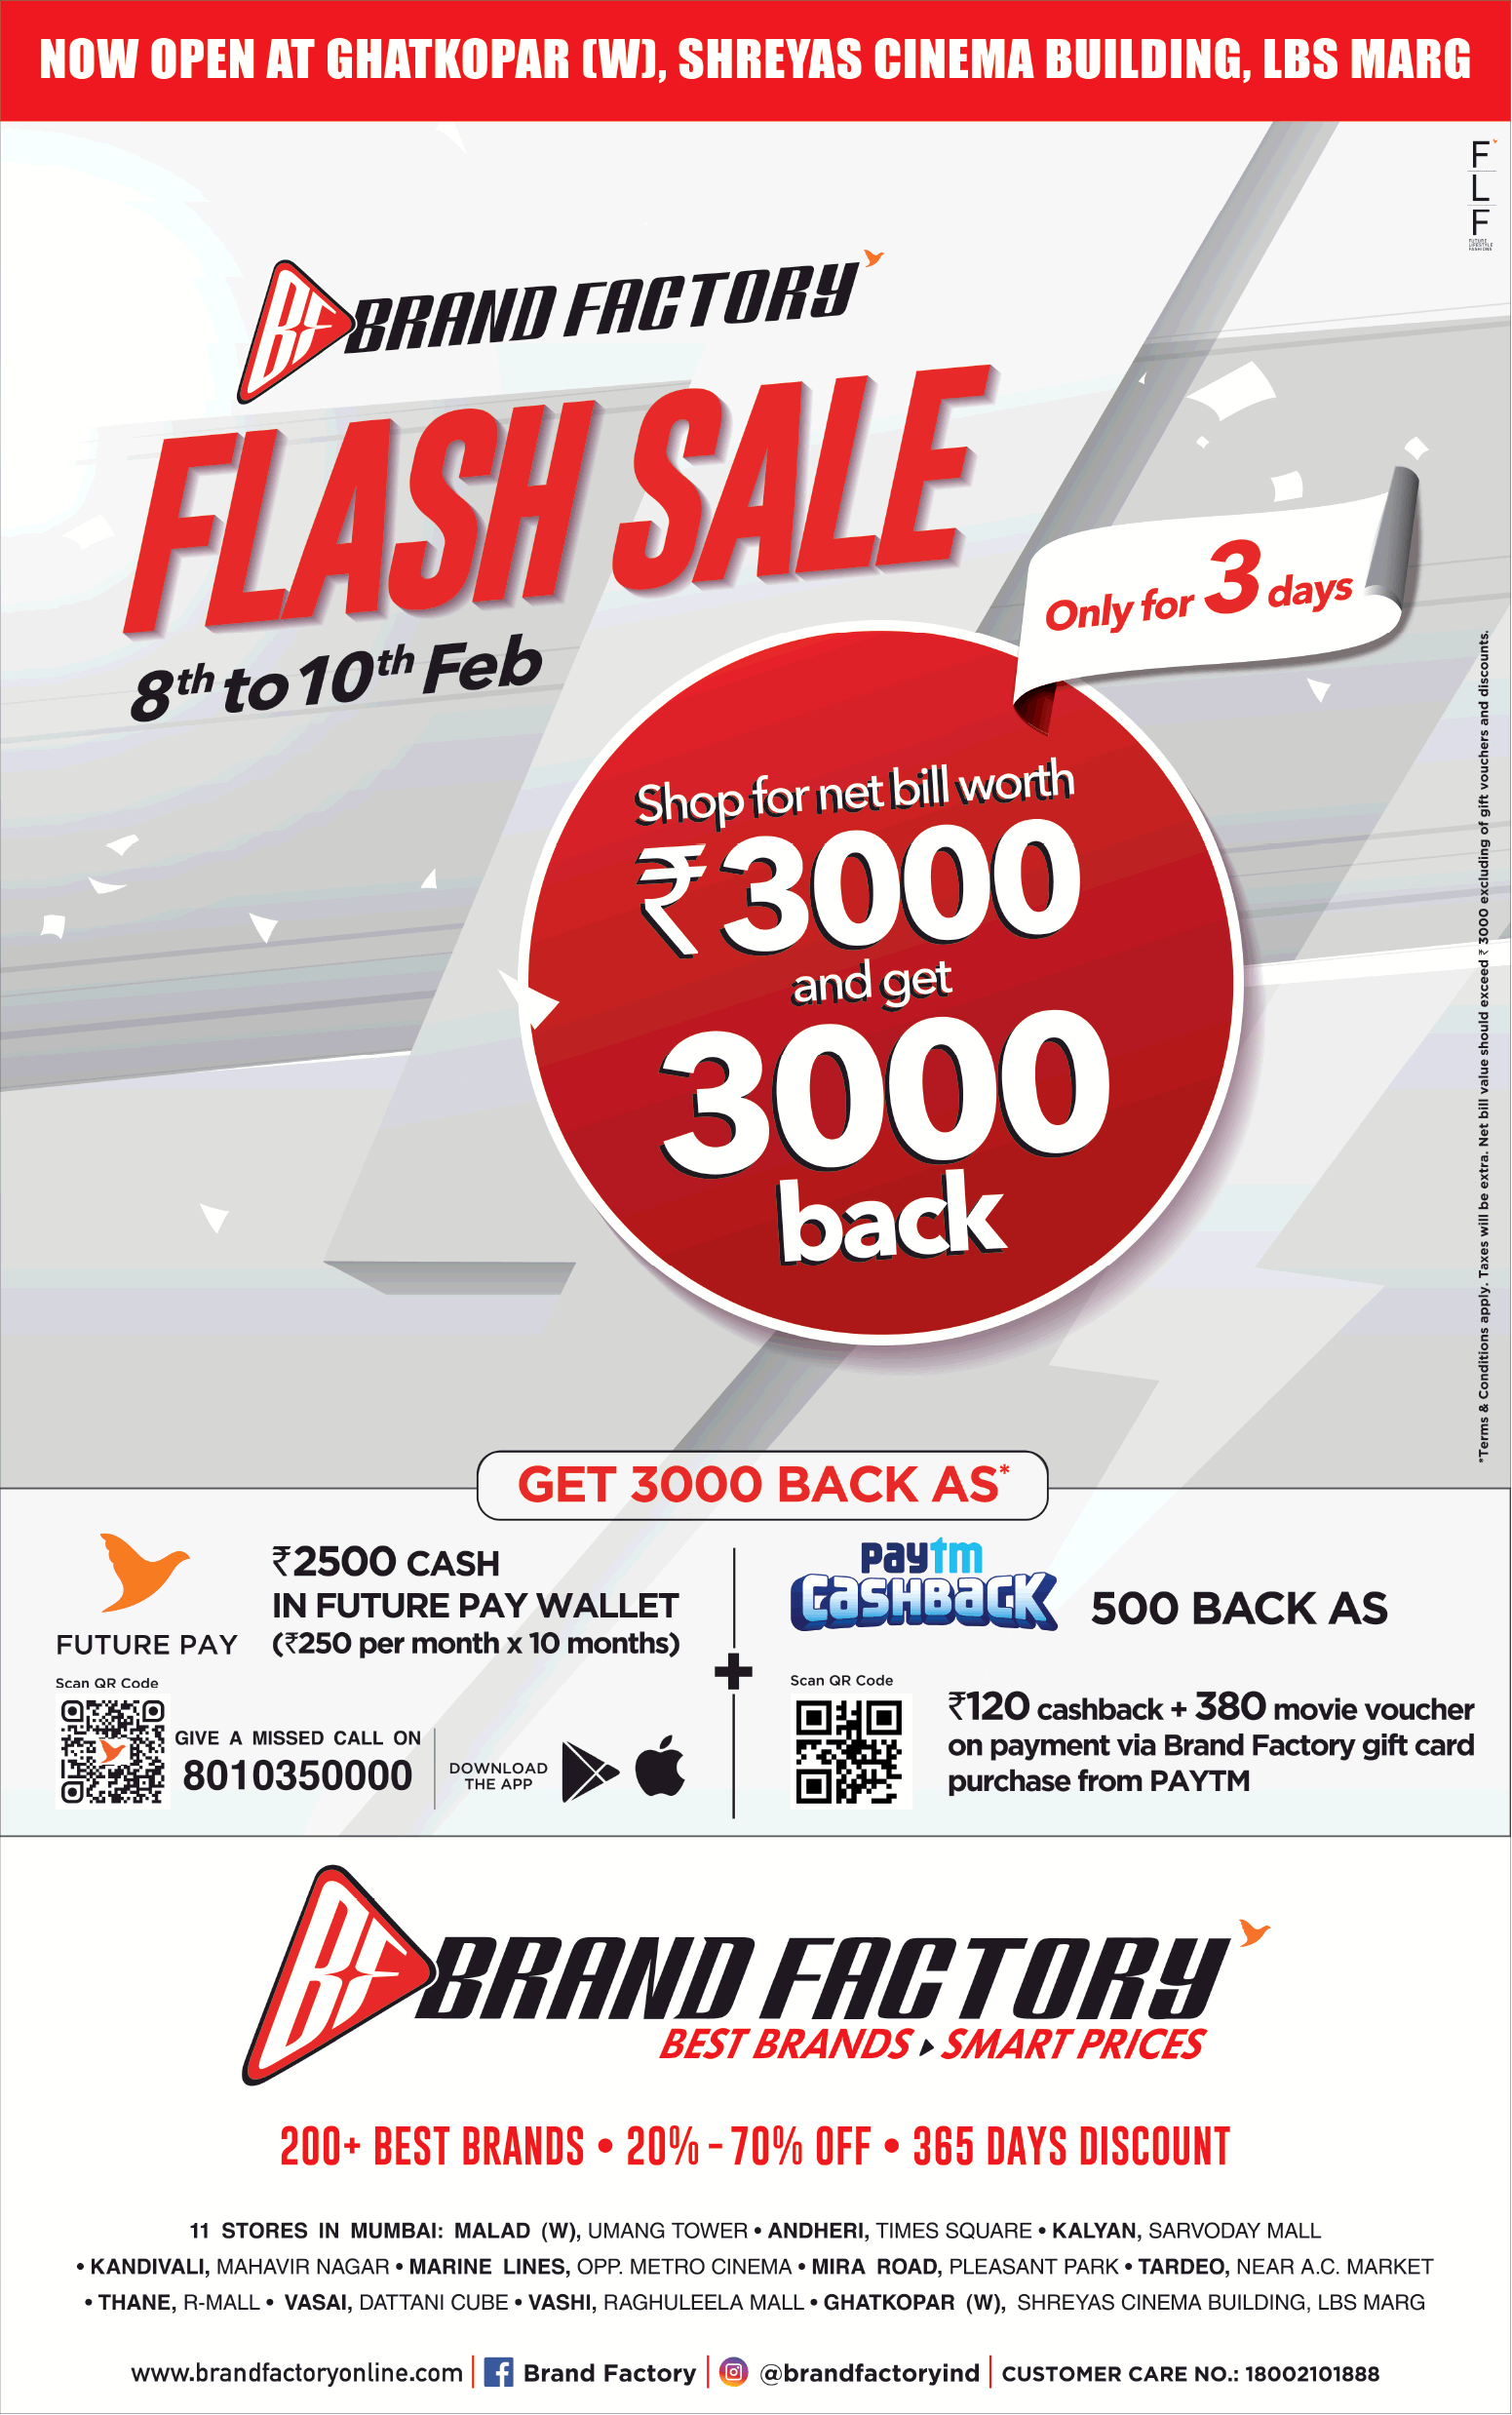 brand-factory-flash-sale-8th-to-10th-feb-only-for-3-days-ad-bombay-times-08-02-2019.png